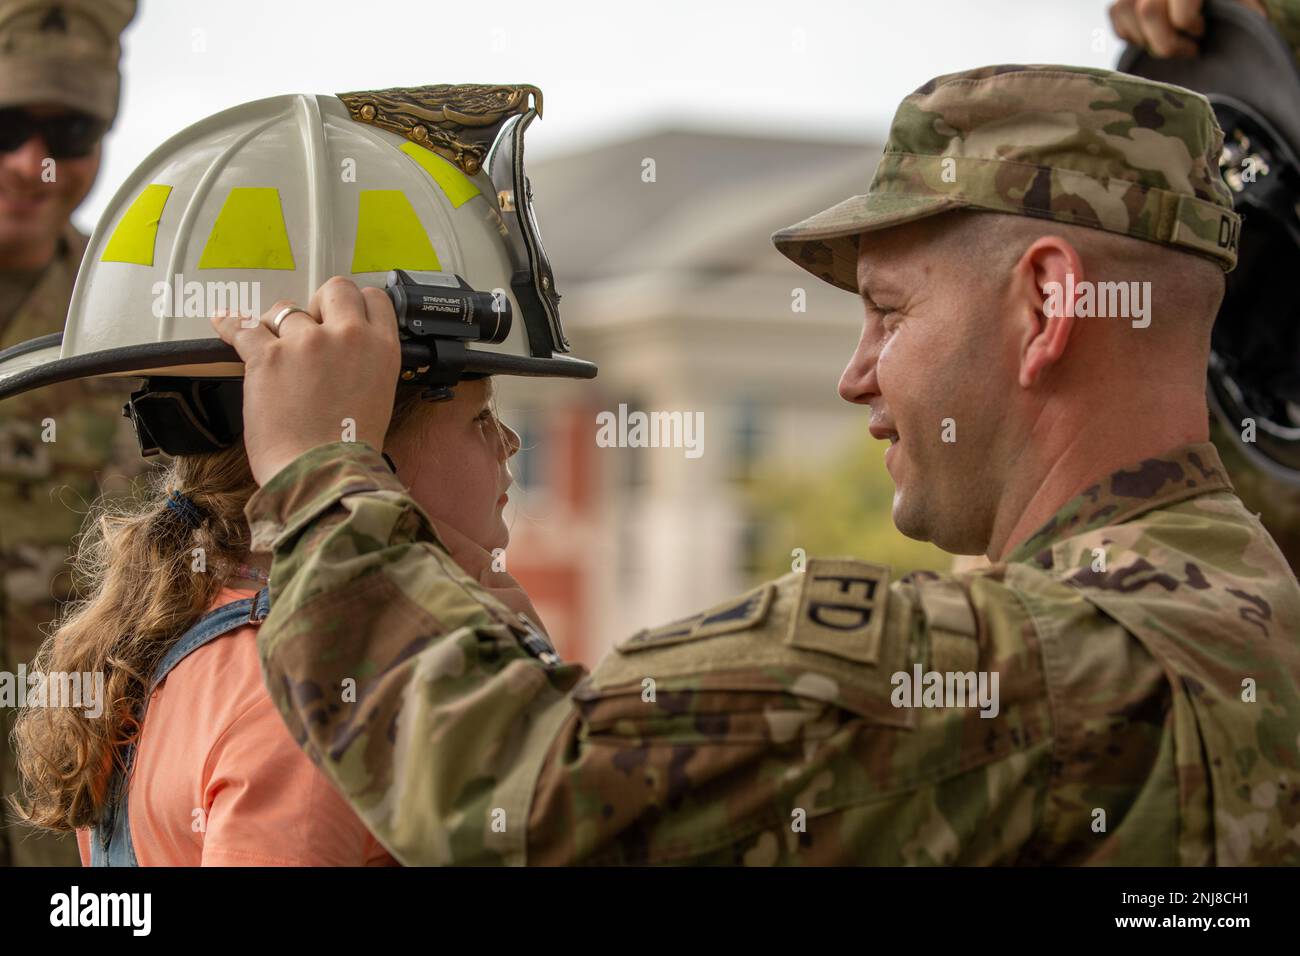 Birdie Amerson, 6, of Des Moines, tries on a firefighter helmet with the help of Staff Sgt. Alek Davis, 516th Engineer Detachment, of Cedar Falls during a U.S. Army Reserve open house at Fort Des Moines, Aug. 6, 2022. The based is home to the 103rd Sustainment Command (Expeditionary) and more than 20 other units from the Army Reserve. Stock Photo